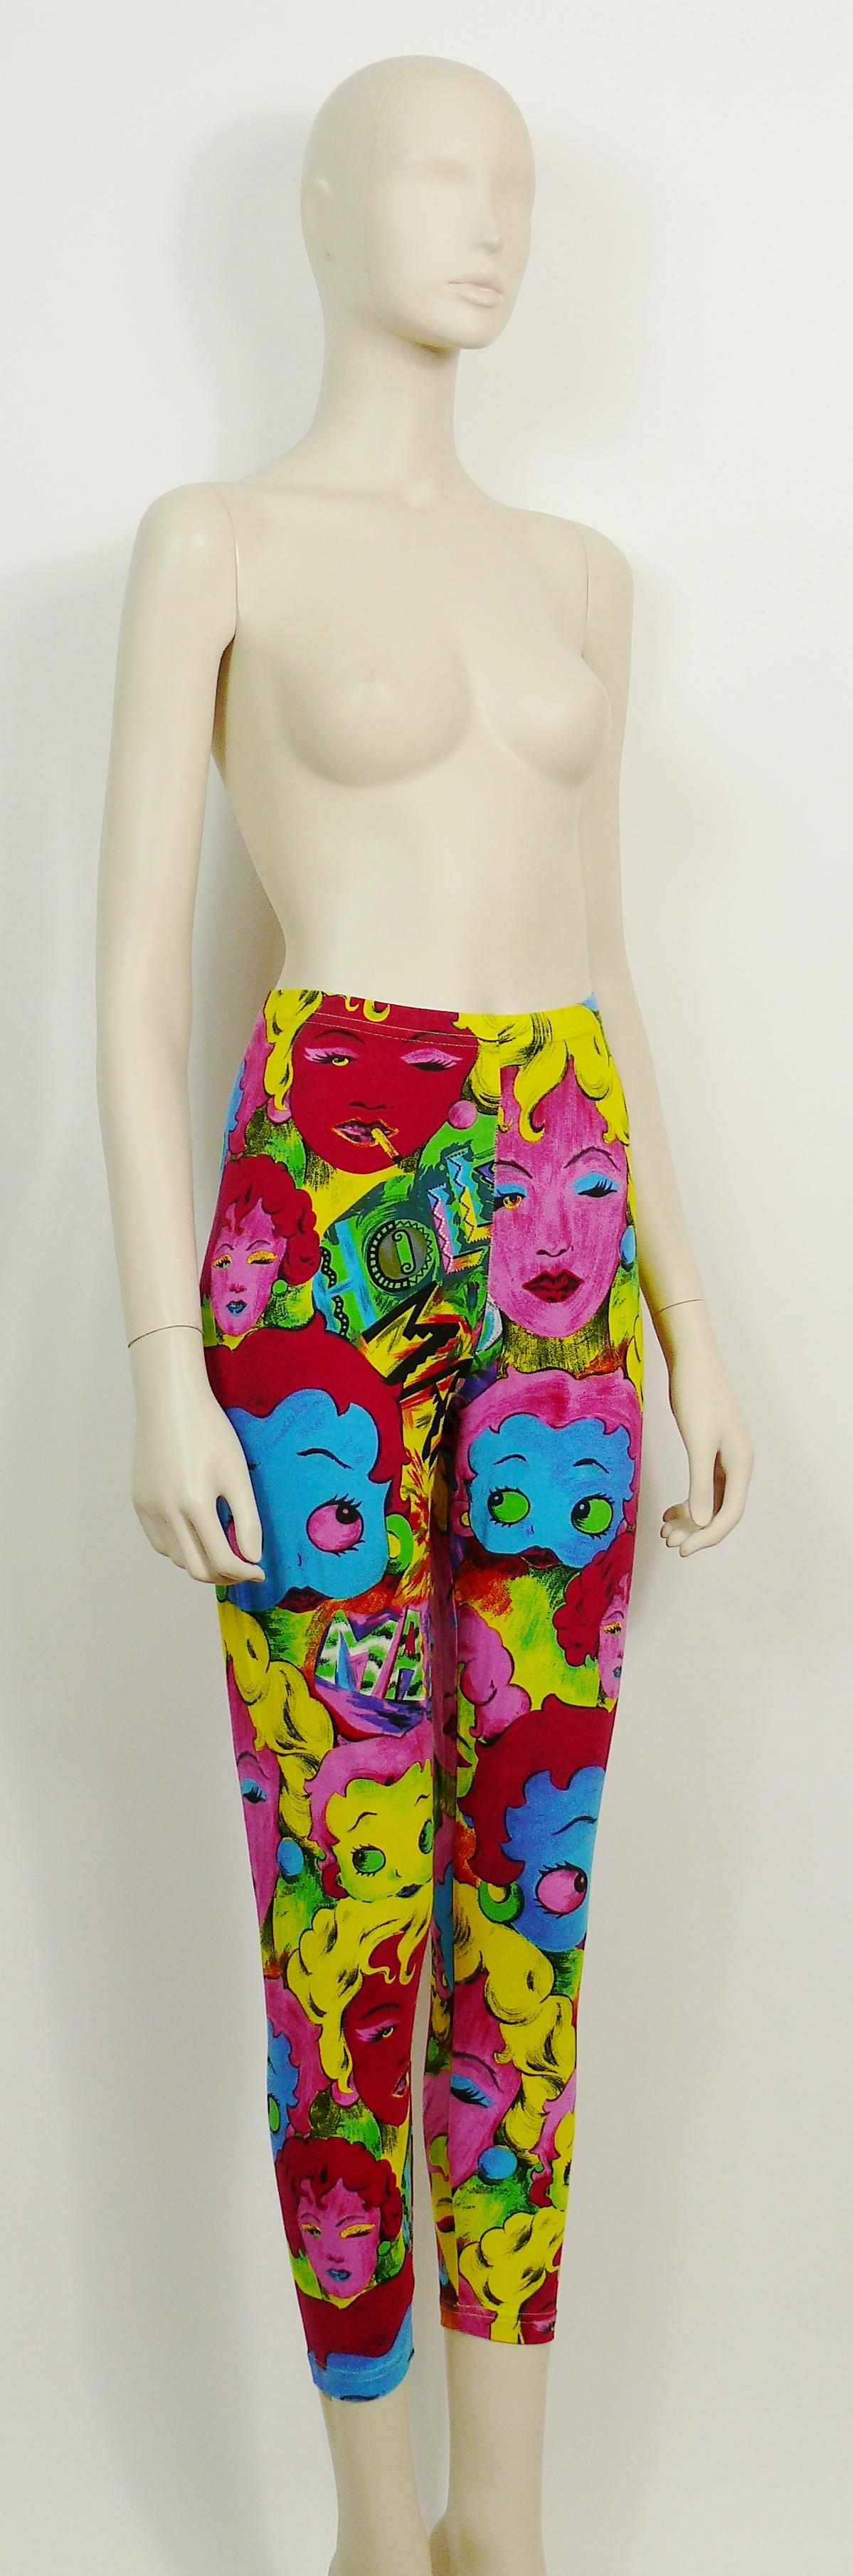 VERSACE JEANS COUTURE vintage rare leggings featuring ANDY WARHOL's style portrait prints in vibrant colors of MARYILYN MONROE and BETTY BOOP all over.

Spring/Summer 1991 Collection.

Label reads VERSACE JEANS COUTURE.
Made in Italy

Composition